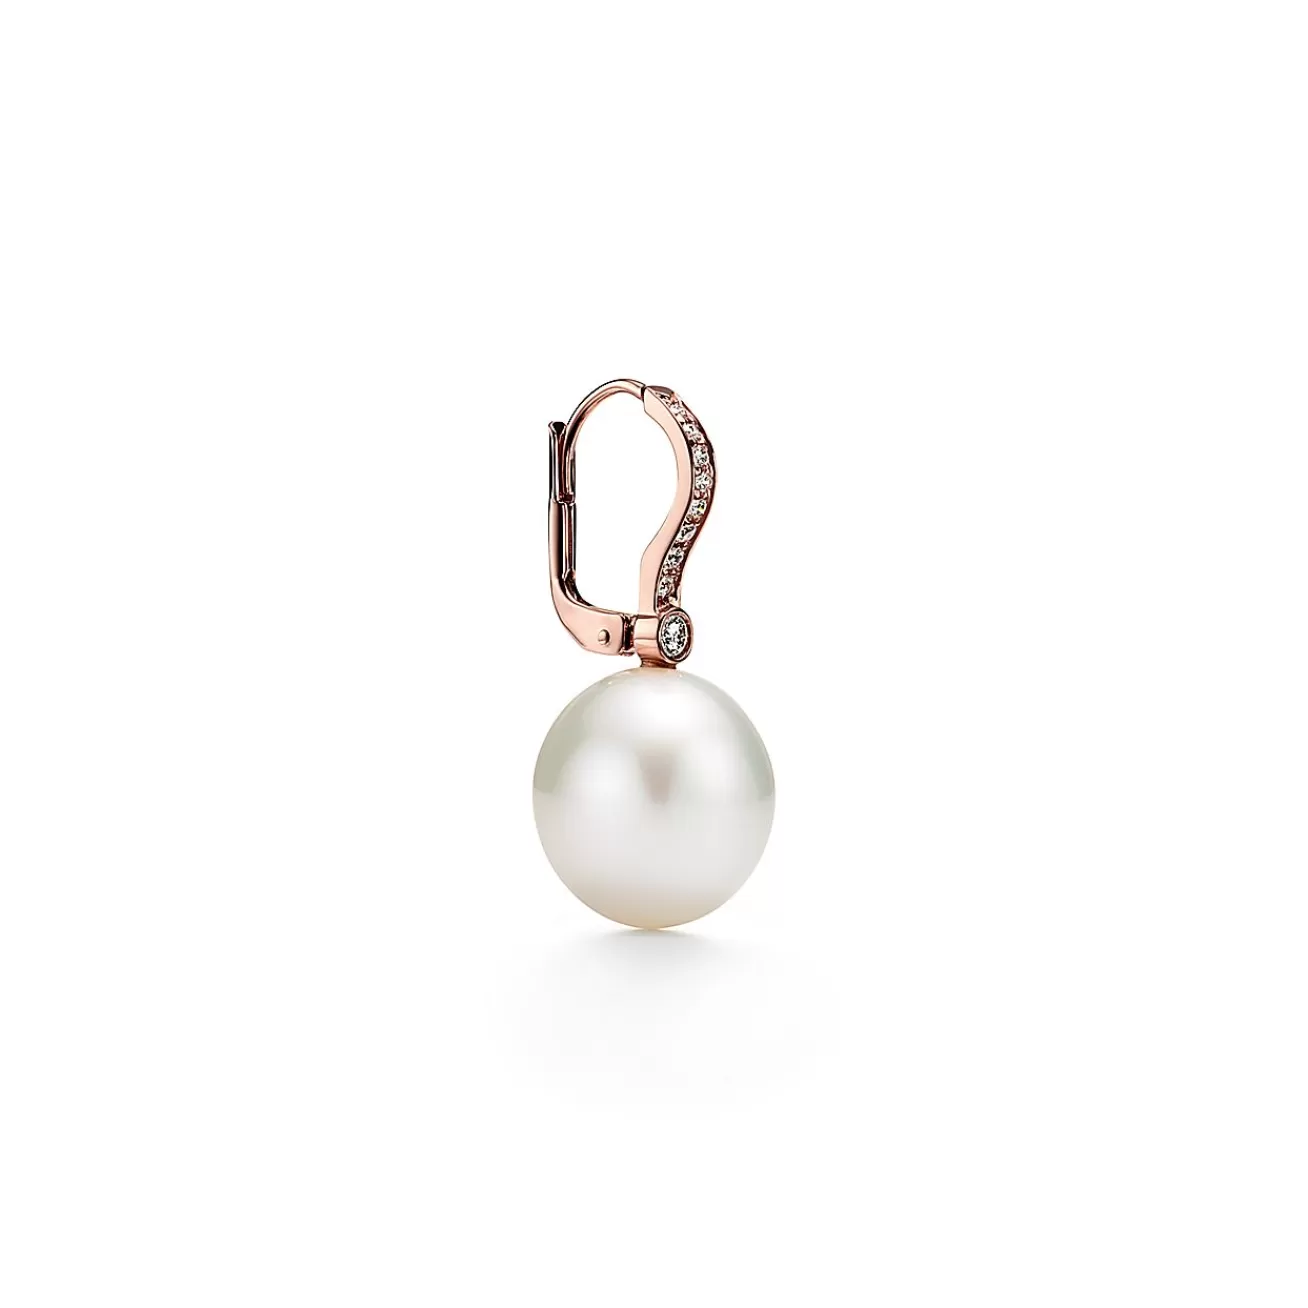 Tiffany & Co. Earrings in 18k rose gold with South Sea cultured pearls and diamonds. | ^ Earrings | Rose Gold Jewelry